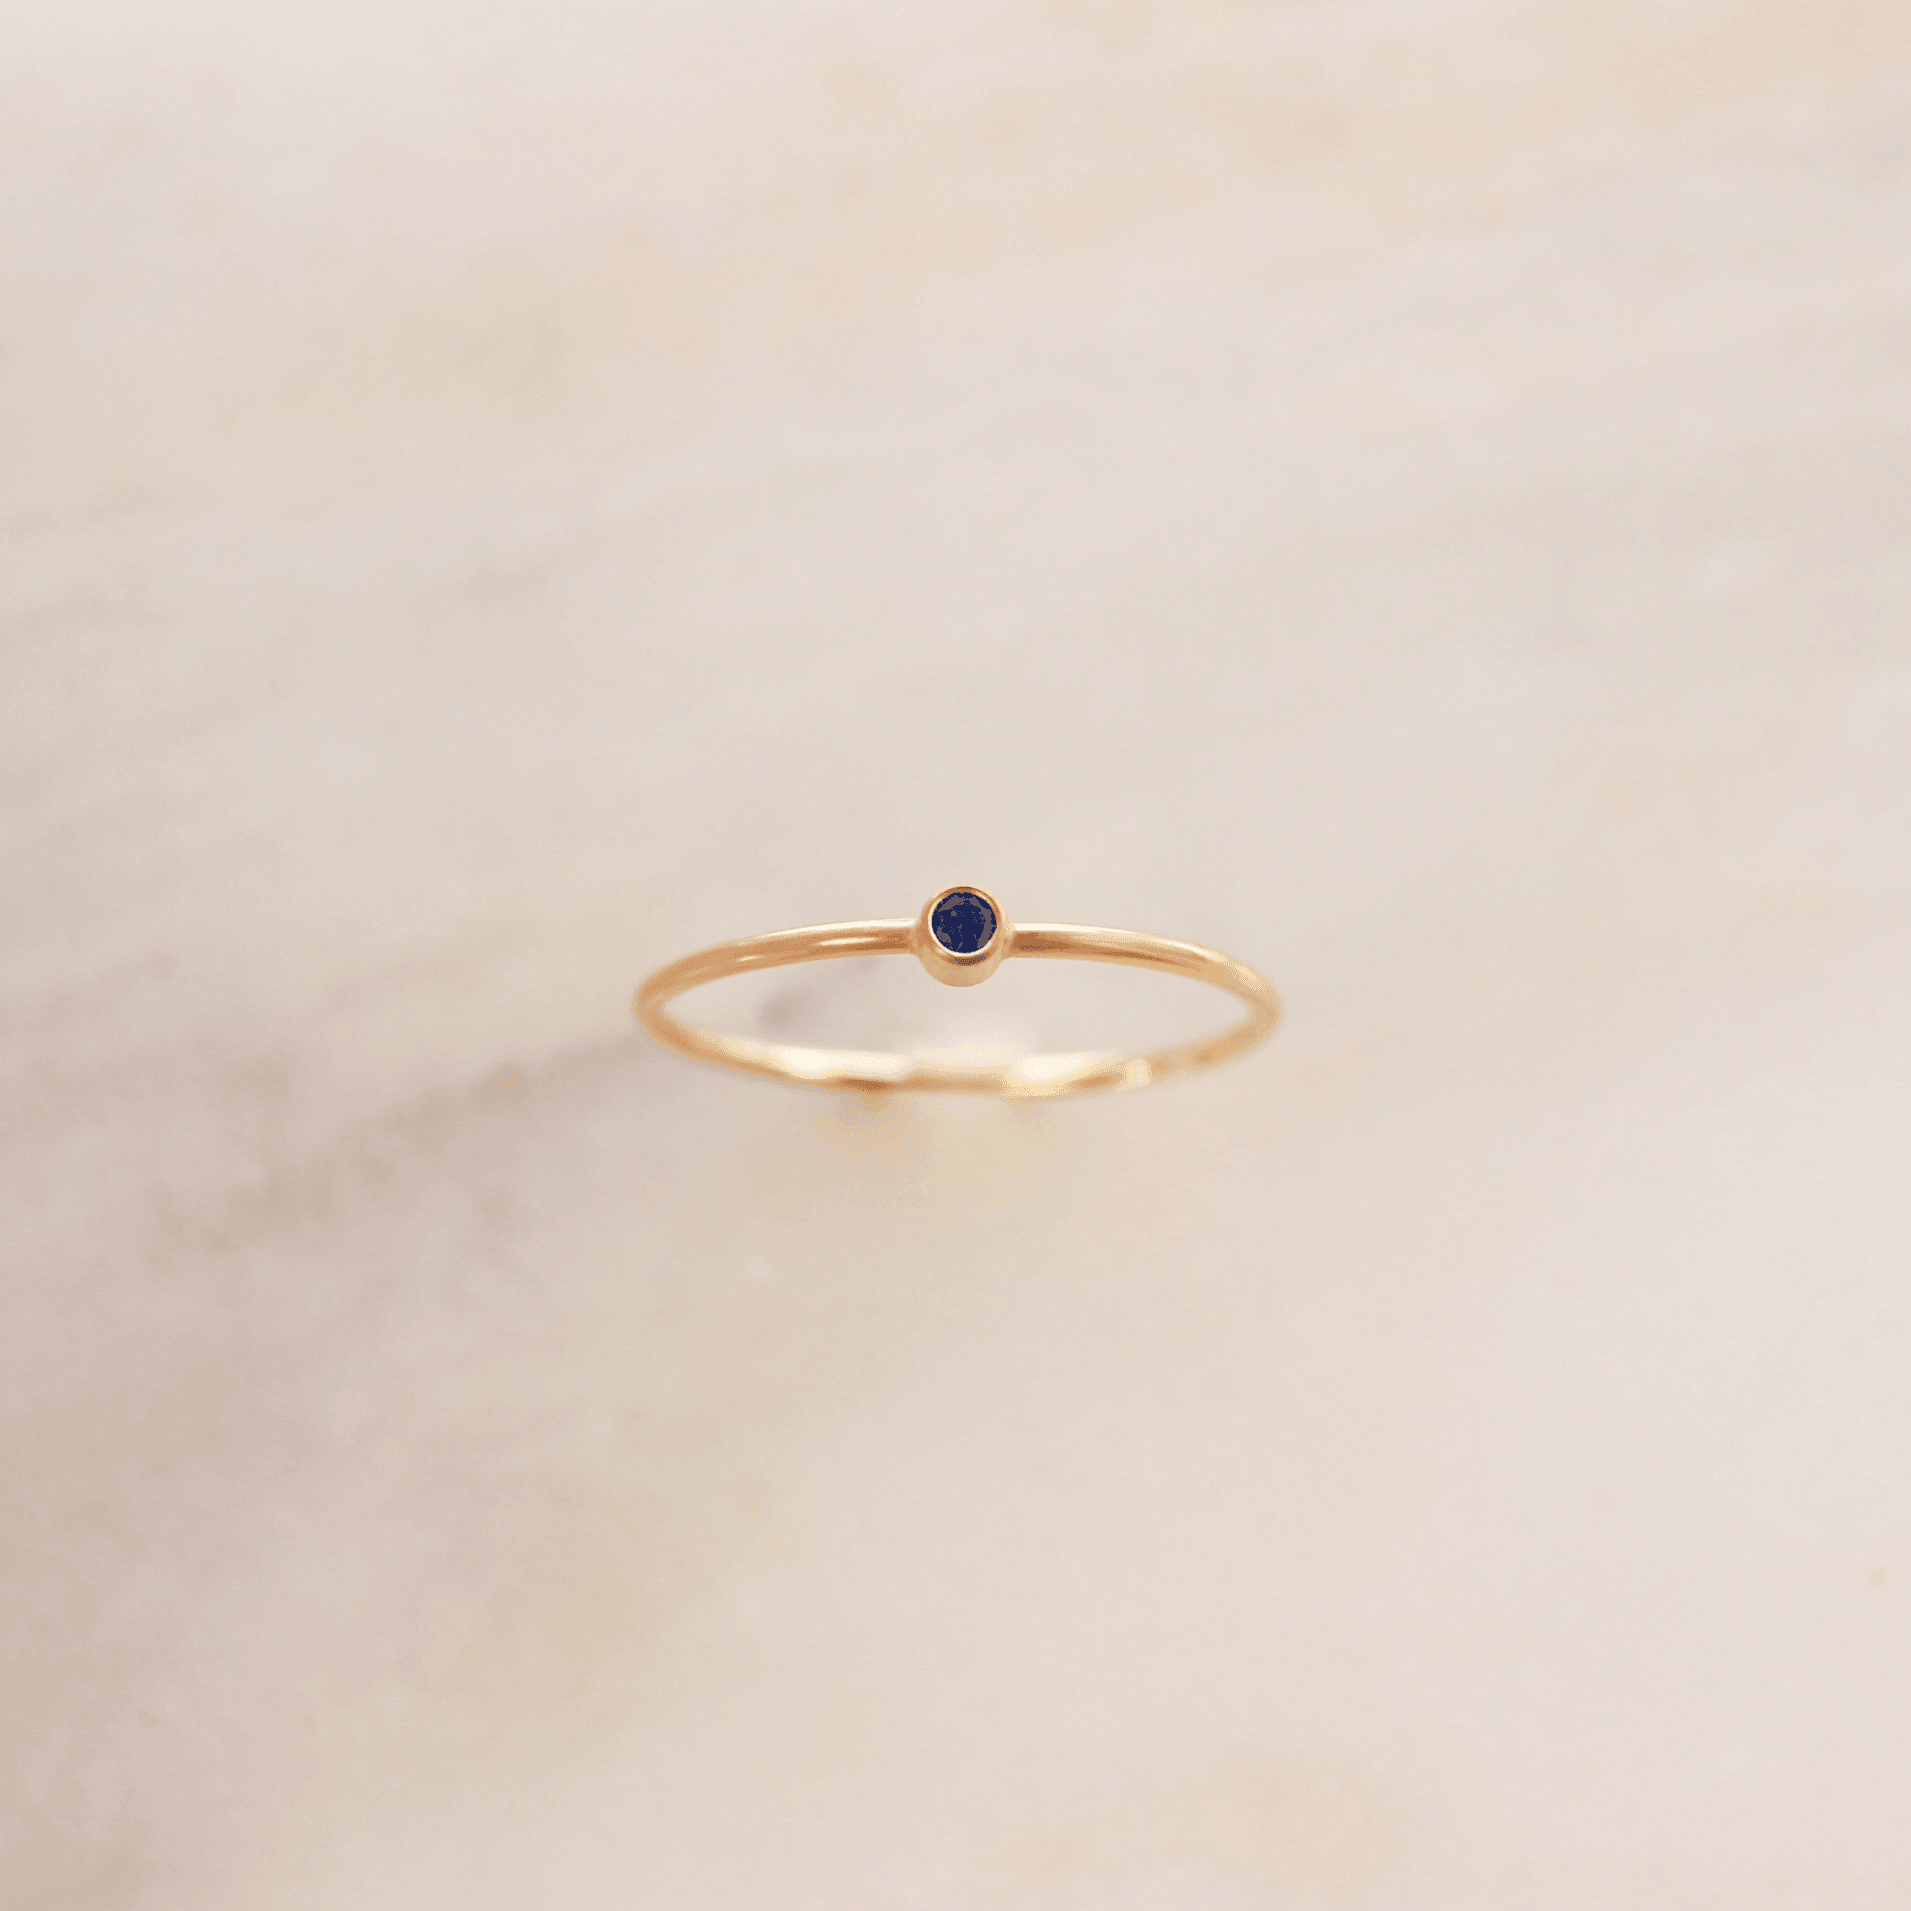 Tiny September Birthstone Ring ∙ Sapphire - Nolia Jewelry - Meaningful + Sustainably Handcrafted Jewelry